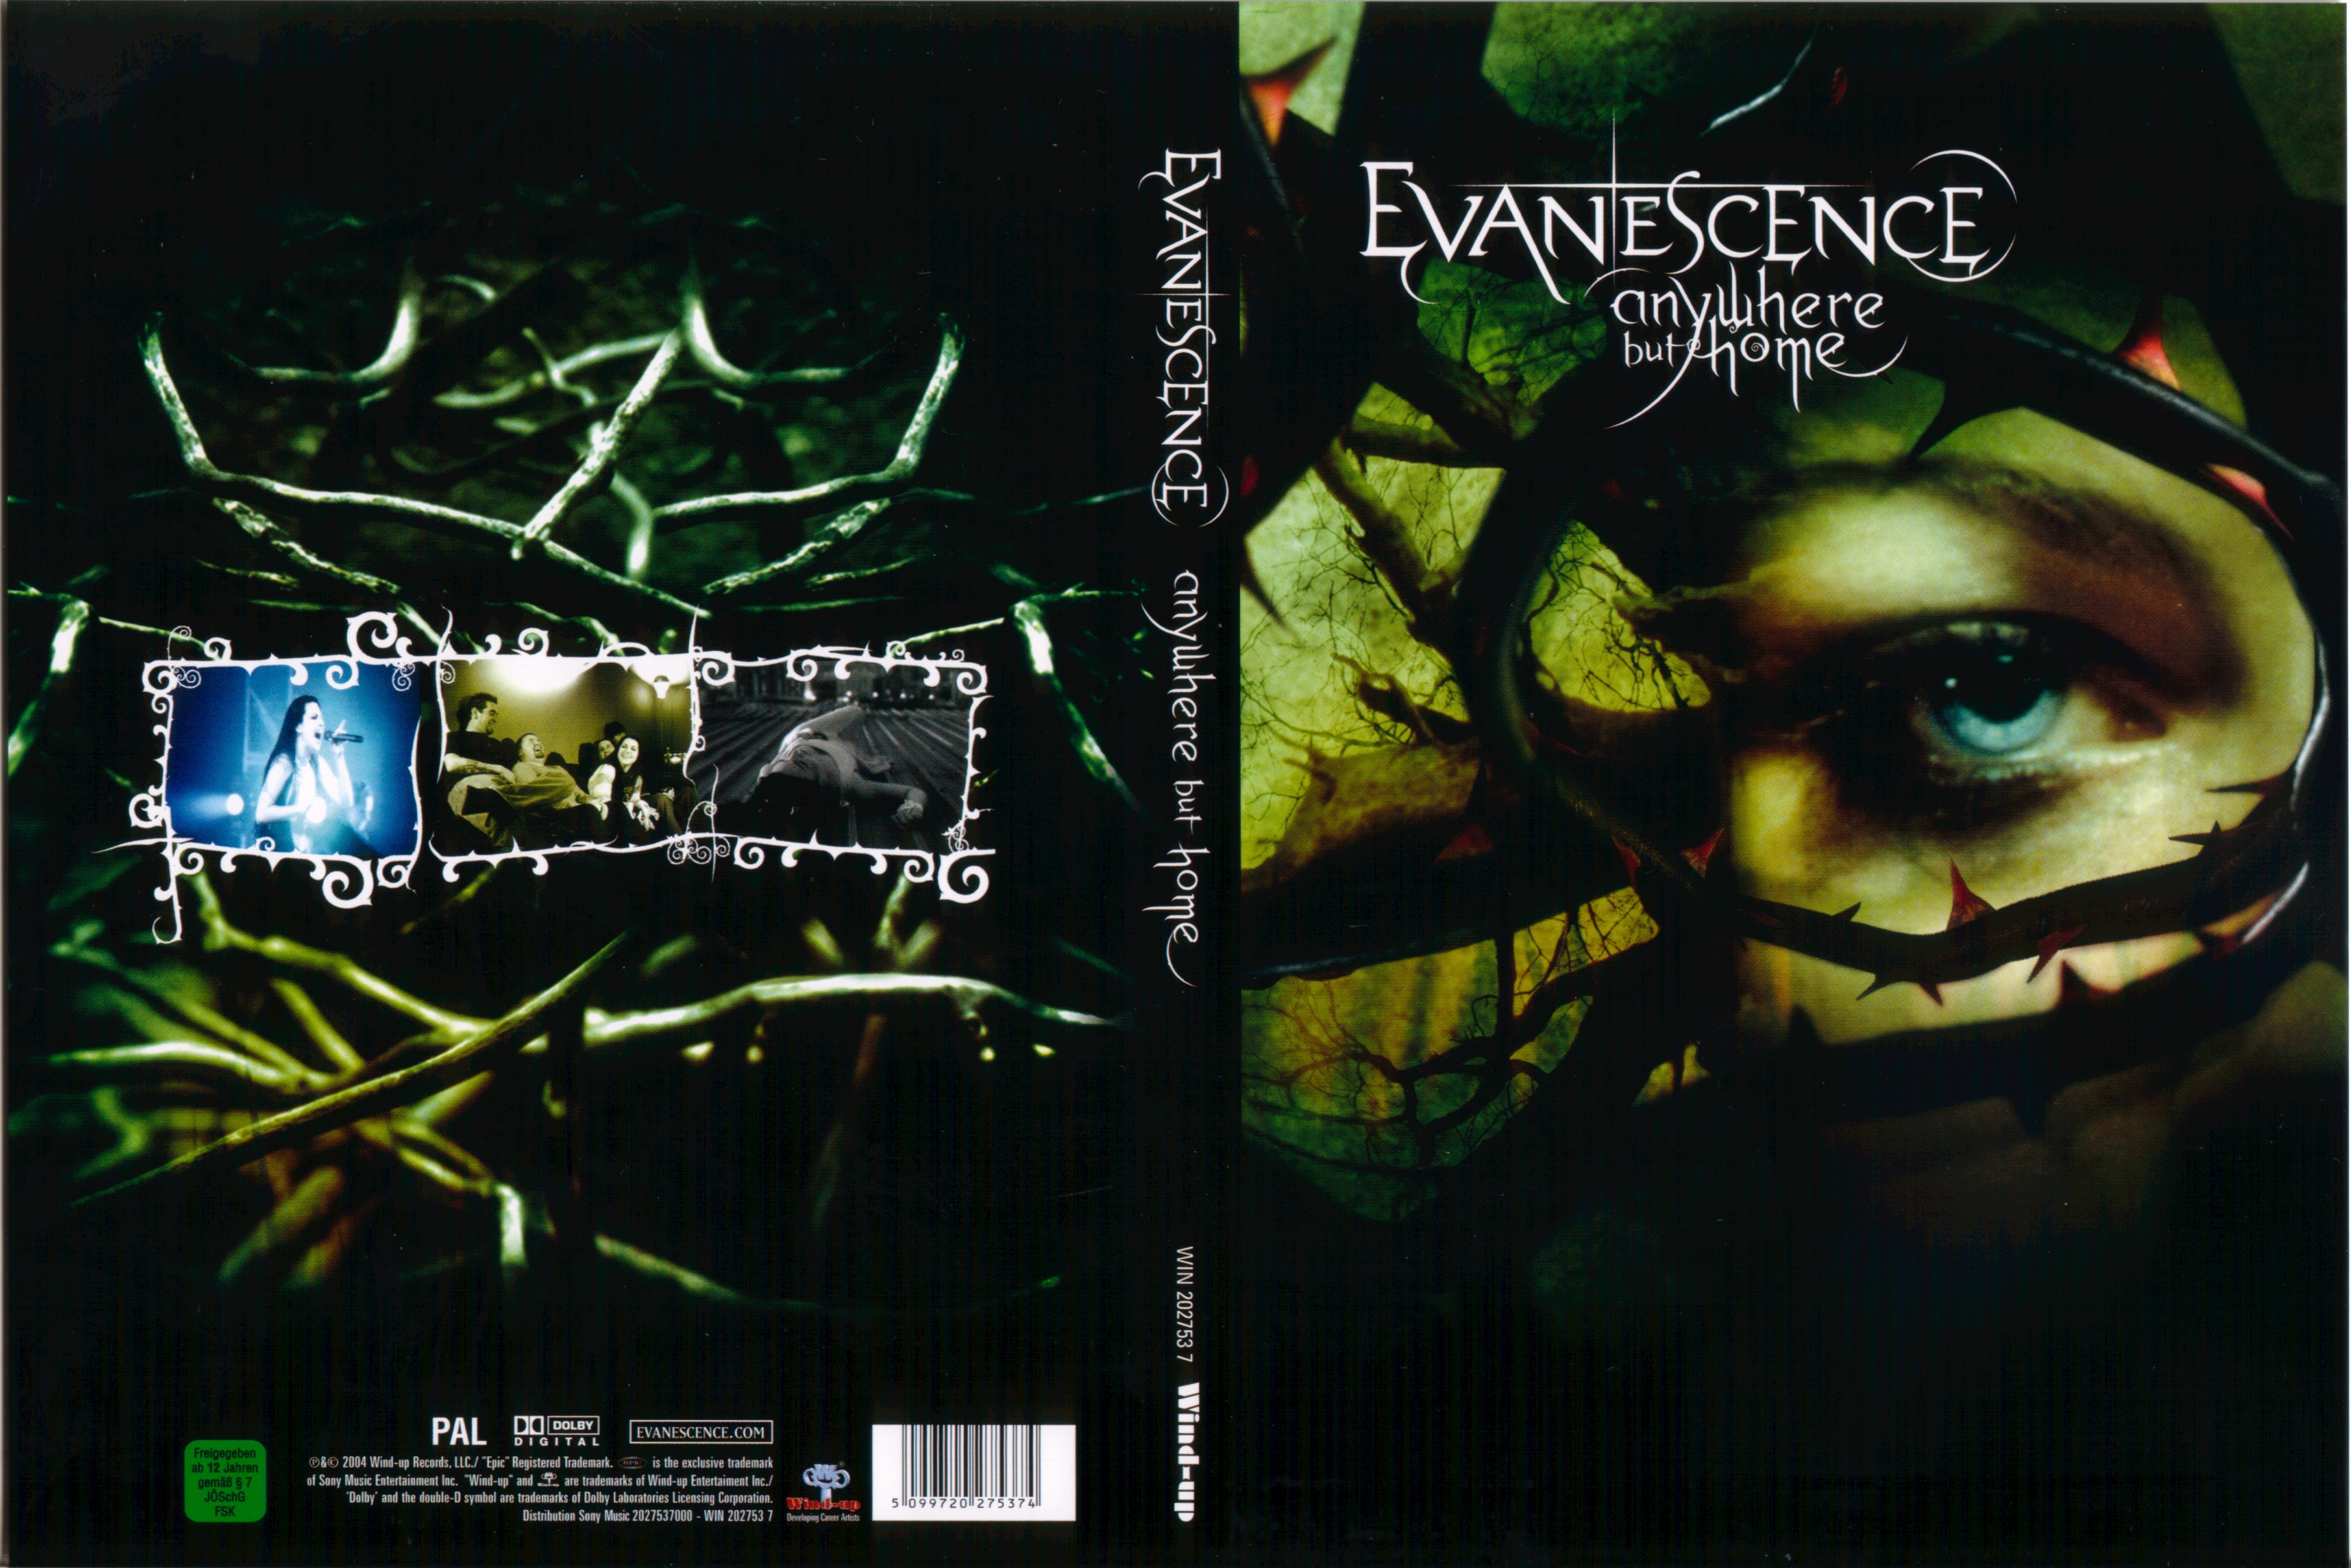 Jaquette DVD Evanescence anywhere but home